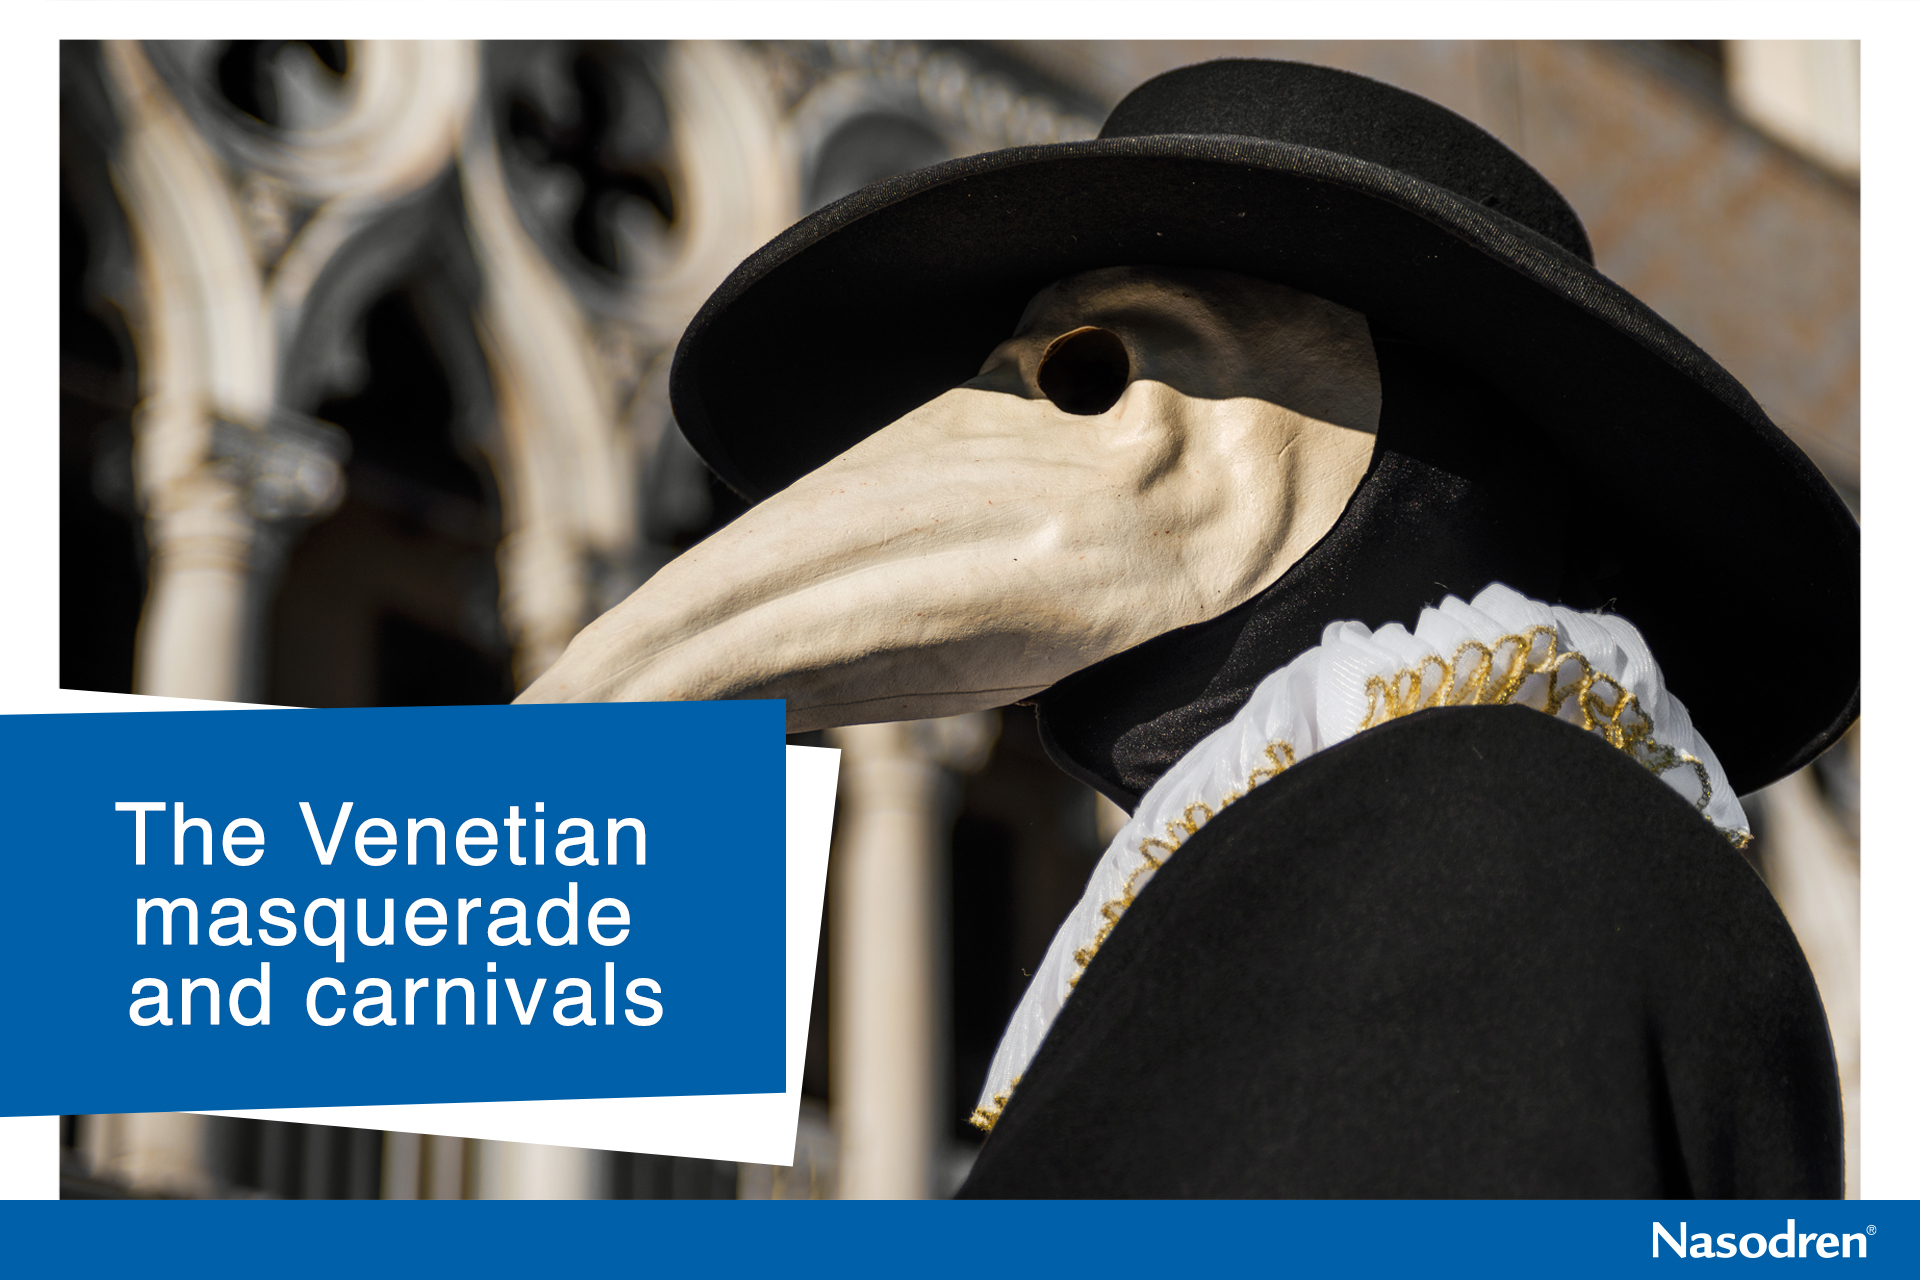 The Venetian masquerade and carnivals